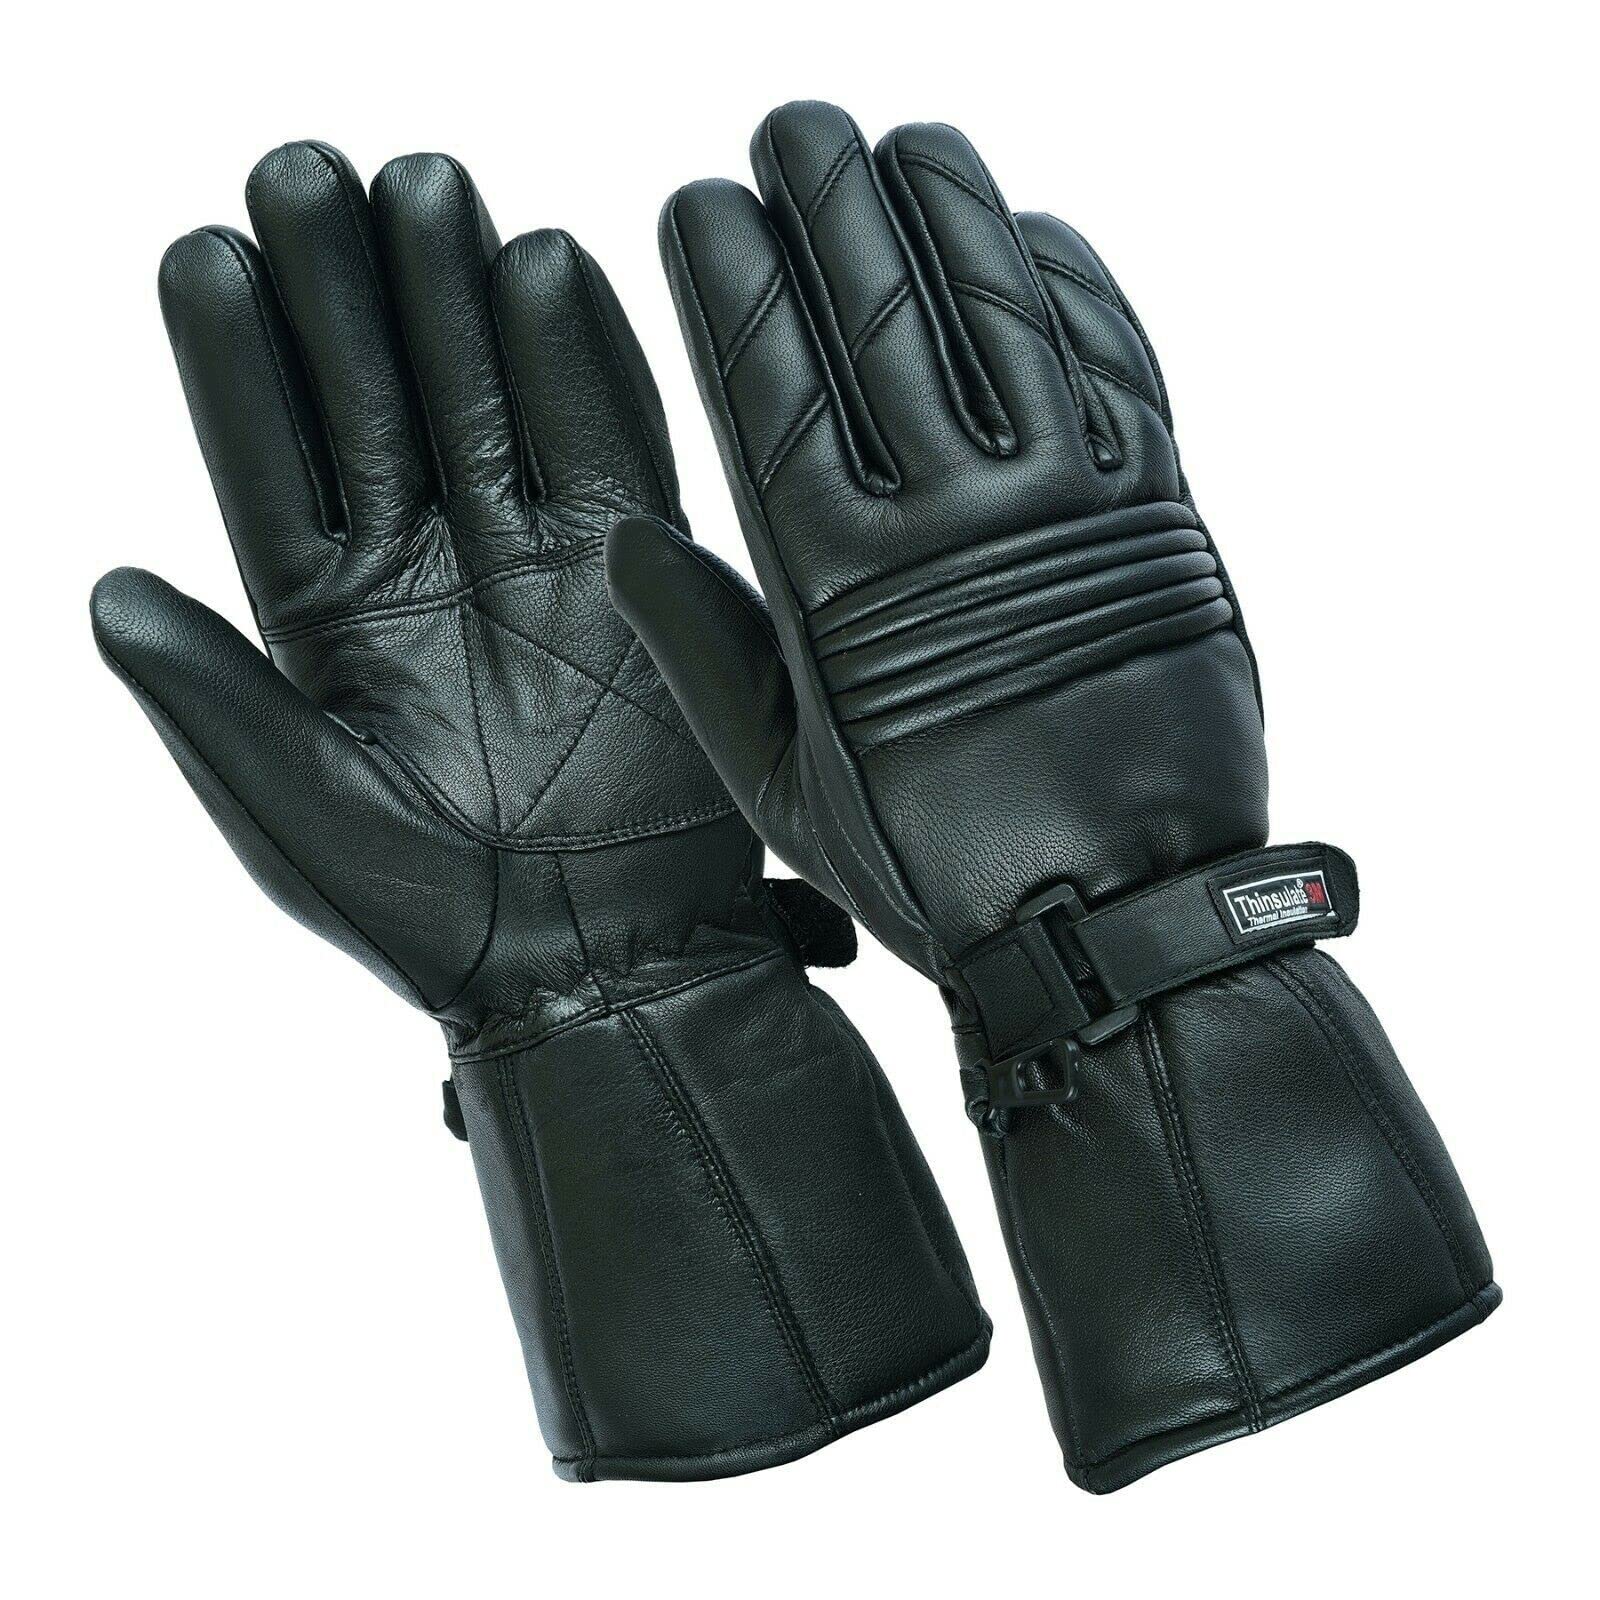 Mens Leather Winter Thermal Labelled Waterproof Inserts Thinsulate Motorcycle Gloves XL von Bikers Gear